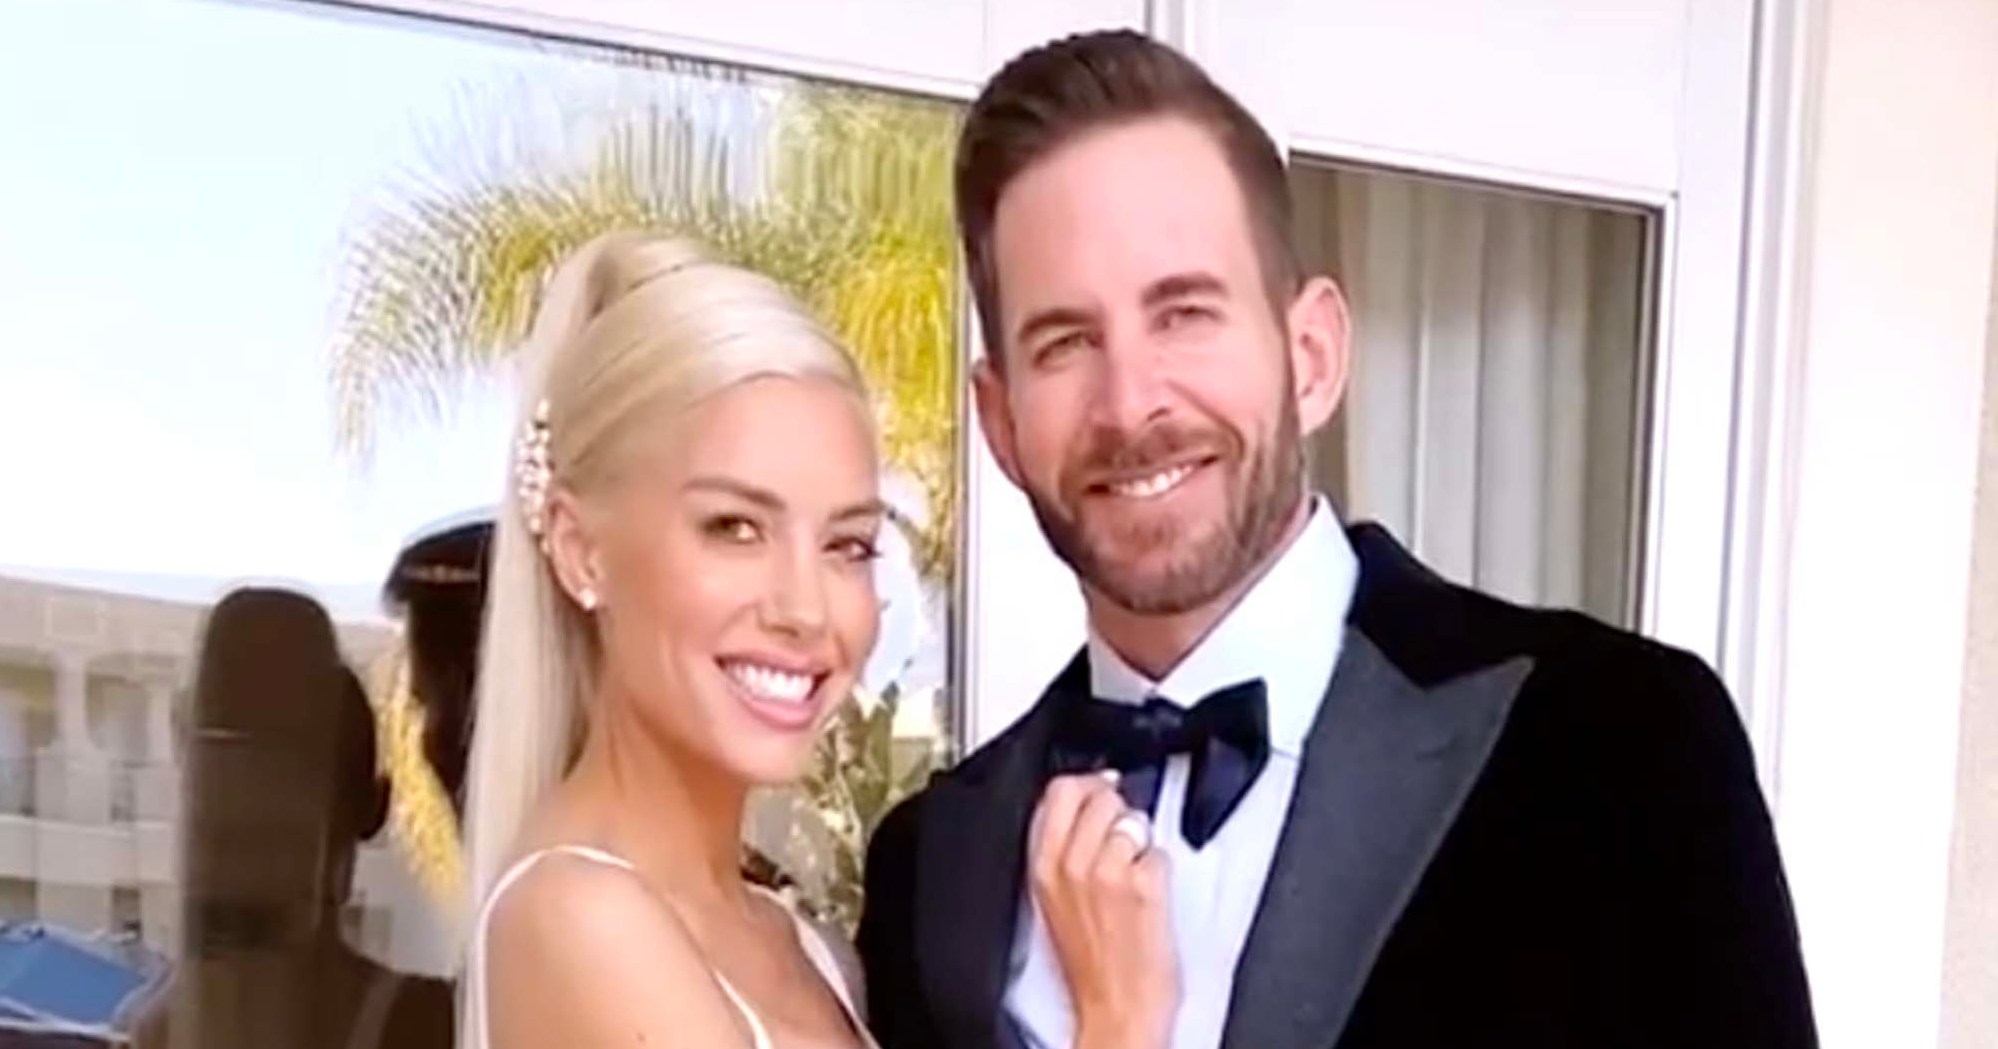 Tarek El Moussa and Heather Rae Young Celebrate 'Perfect' Engagement Party